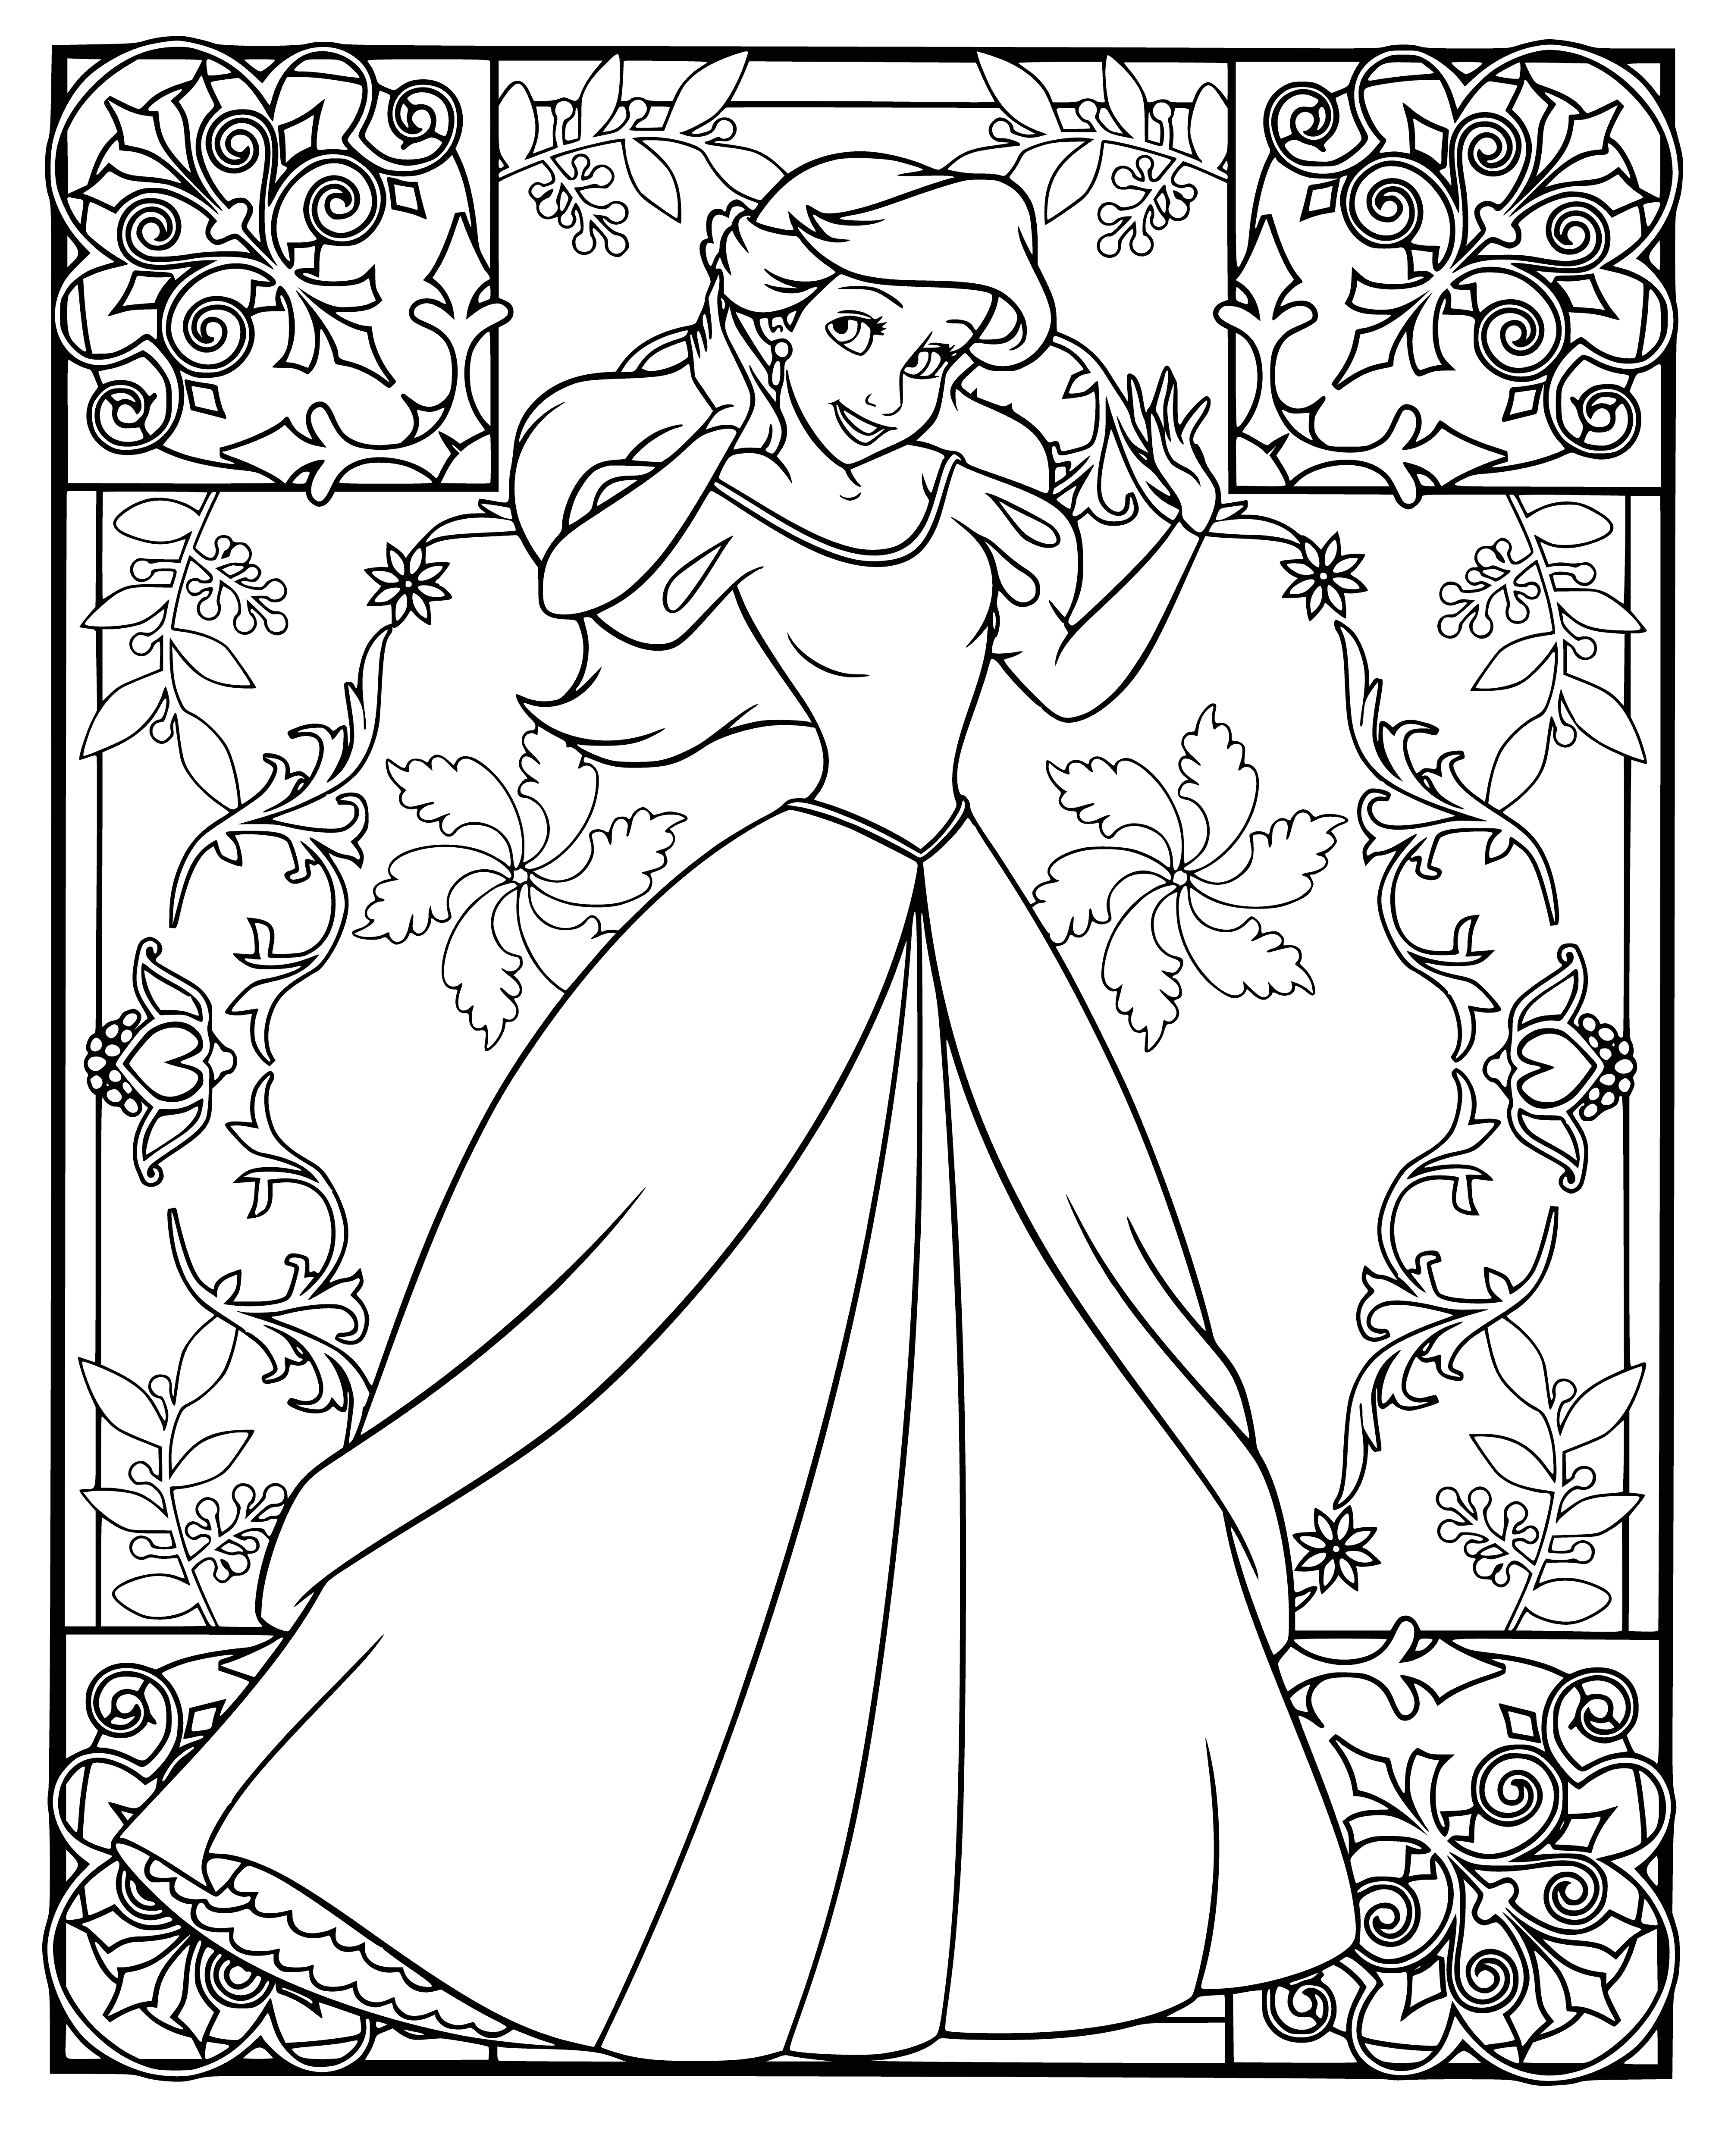 coloring page: A beautiful woman with long, red hair stands by a blue ocean, holding a seashell & ready to throw it. A white dress with blue overlay & ribbon in her hair completes the coloring page.